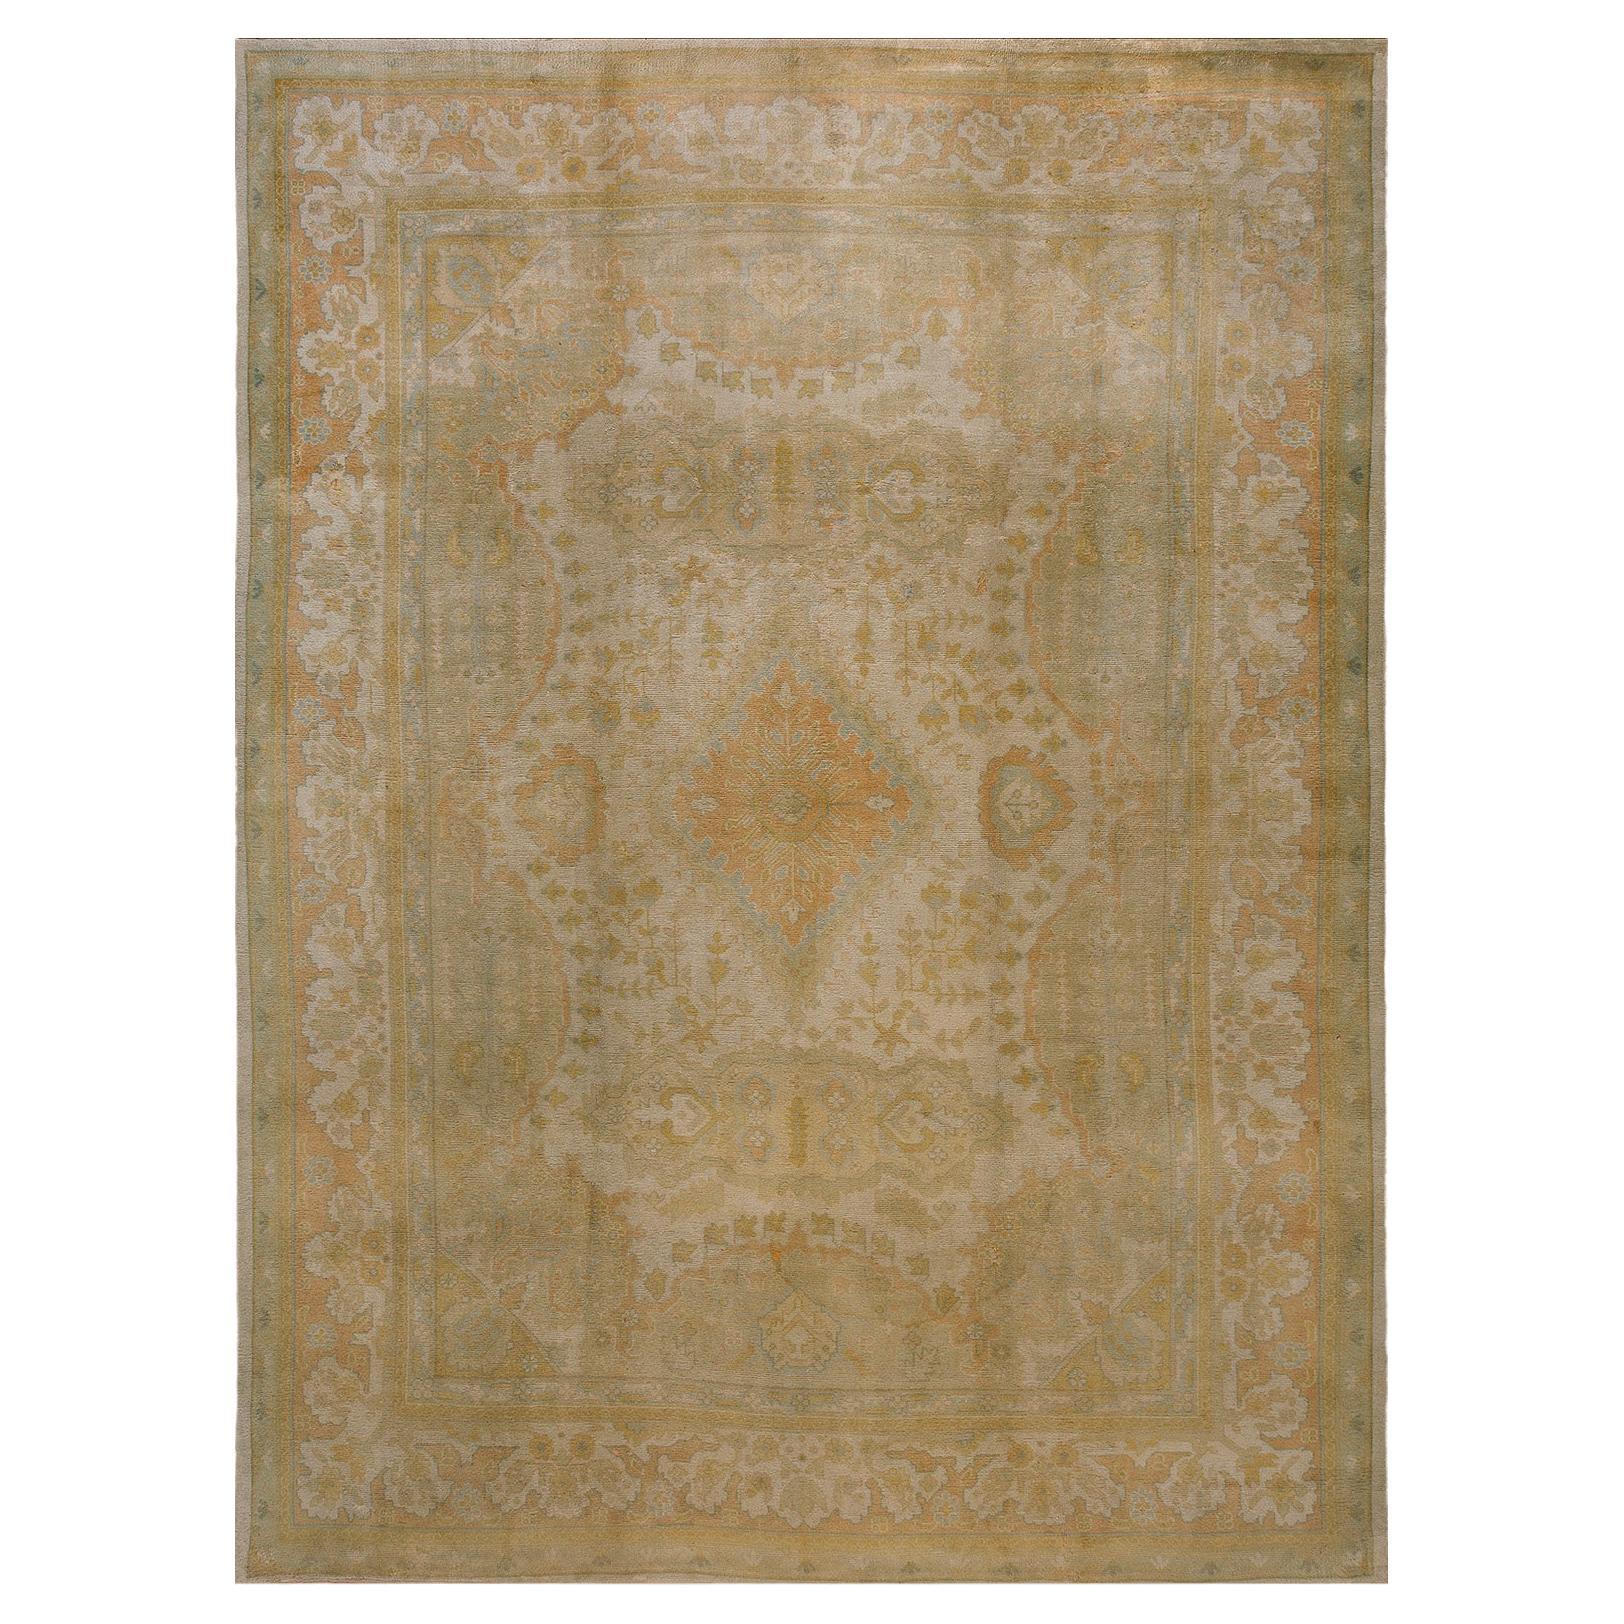 Early 20th Century Turkish Oushak Carpet ( 9'10" x 13'4" - 300 x 435 ) For Sale